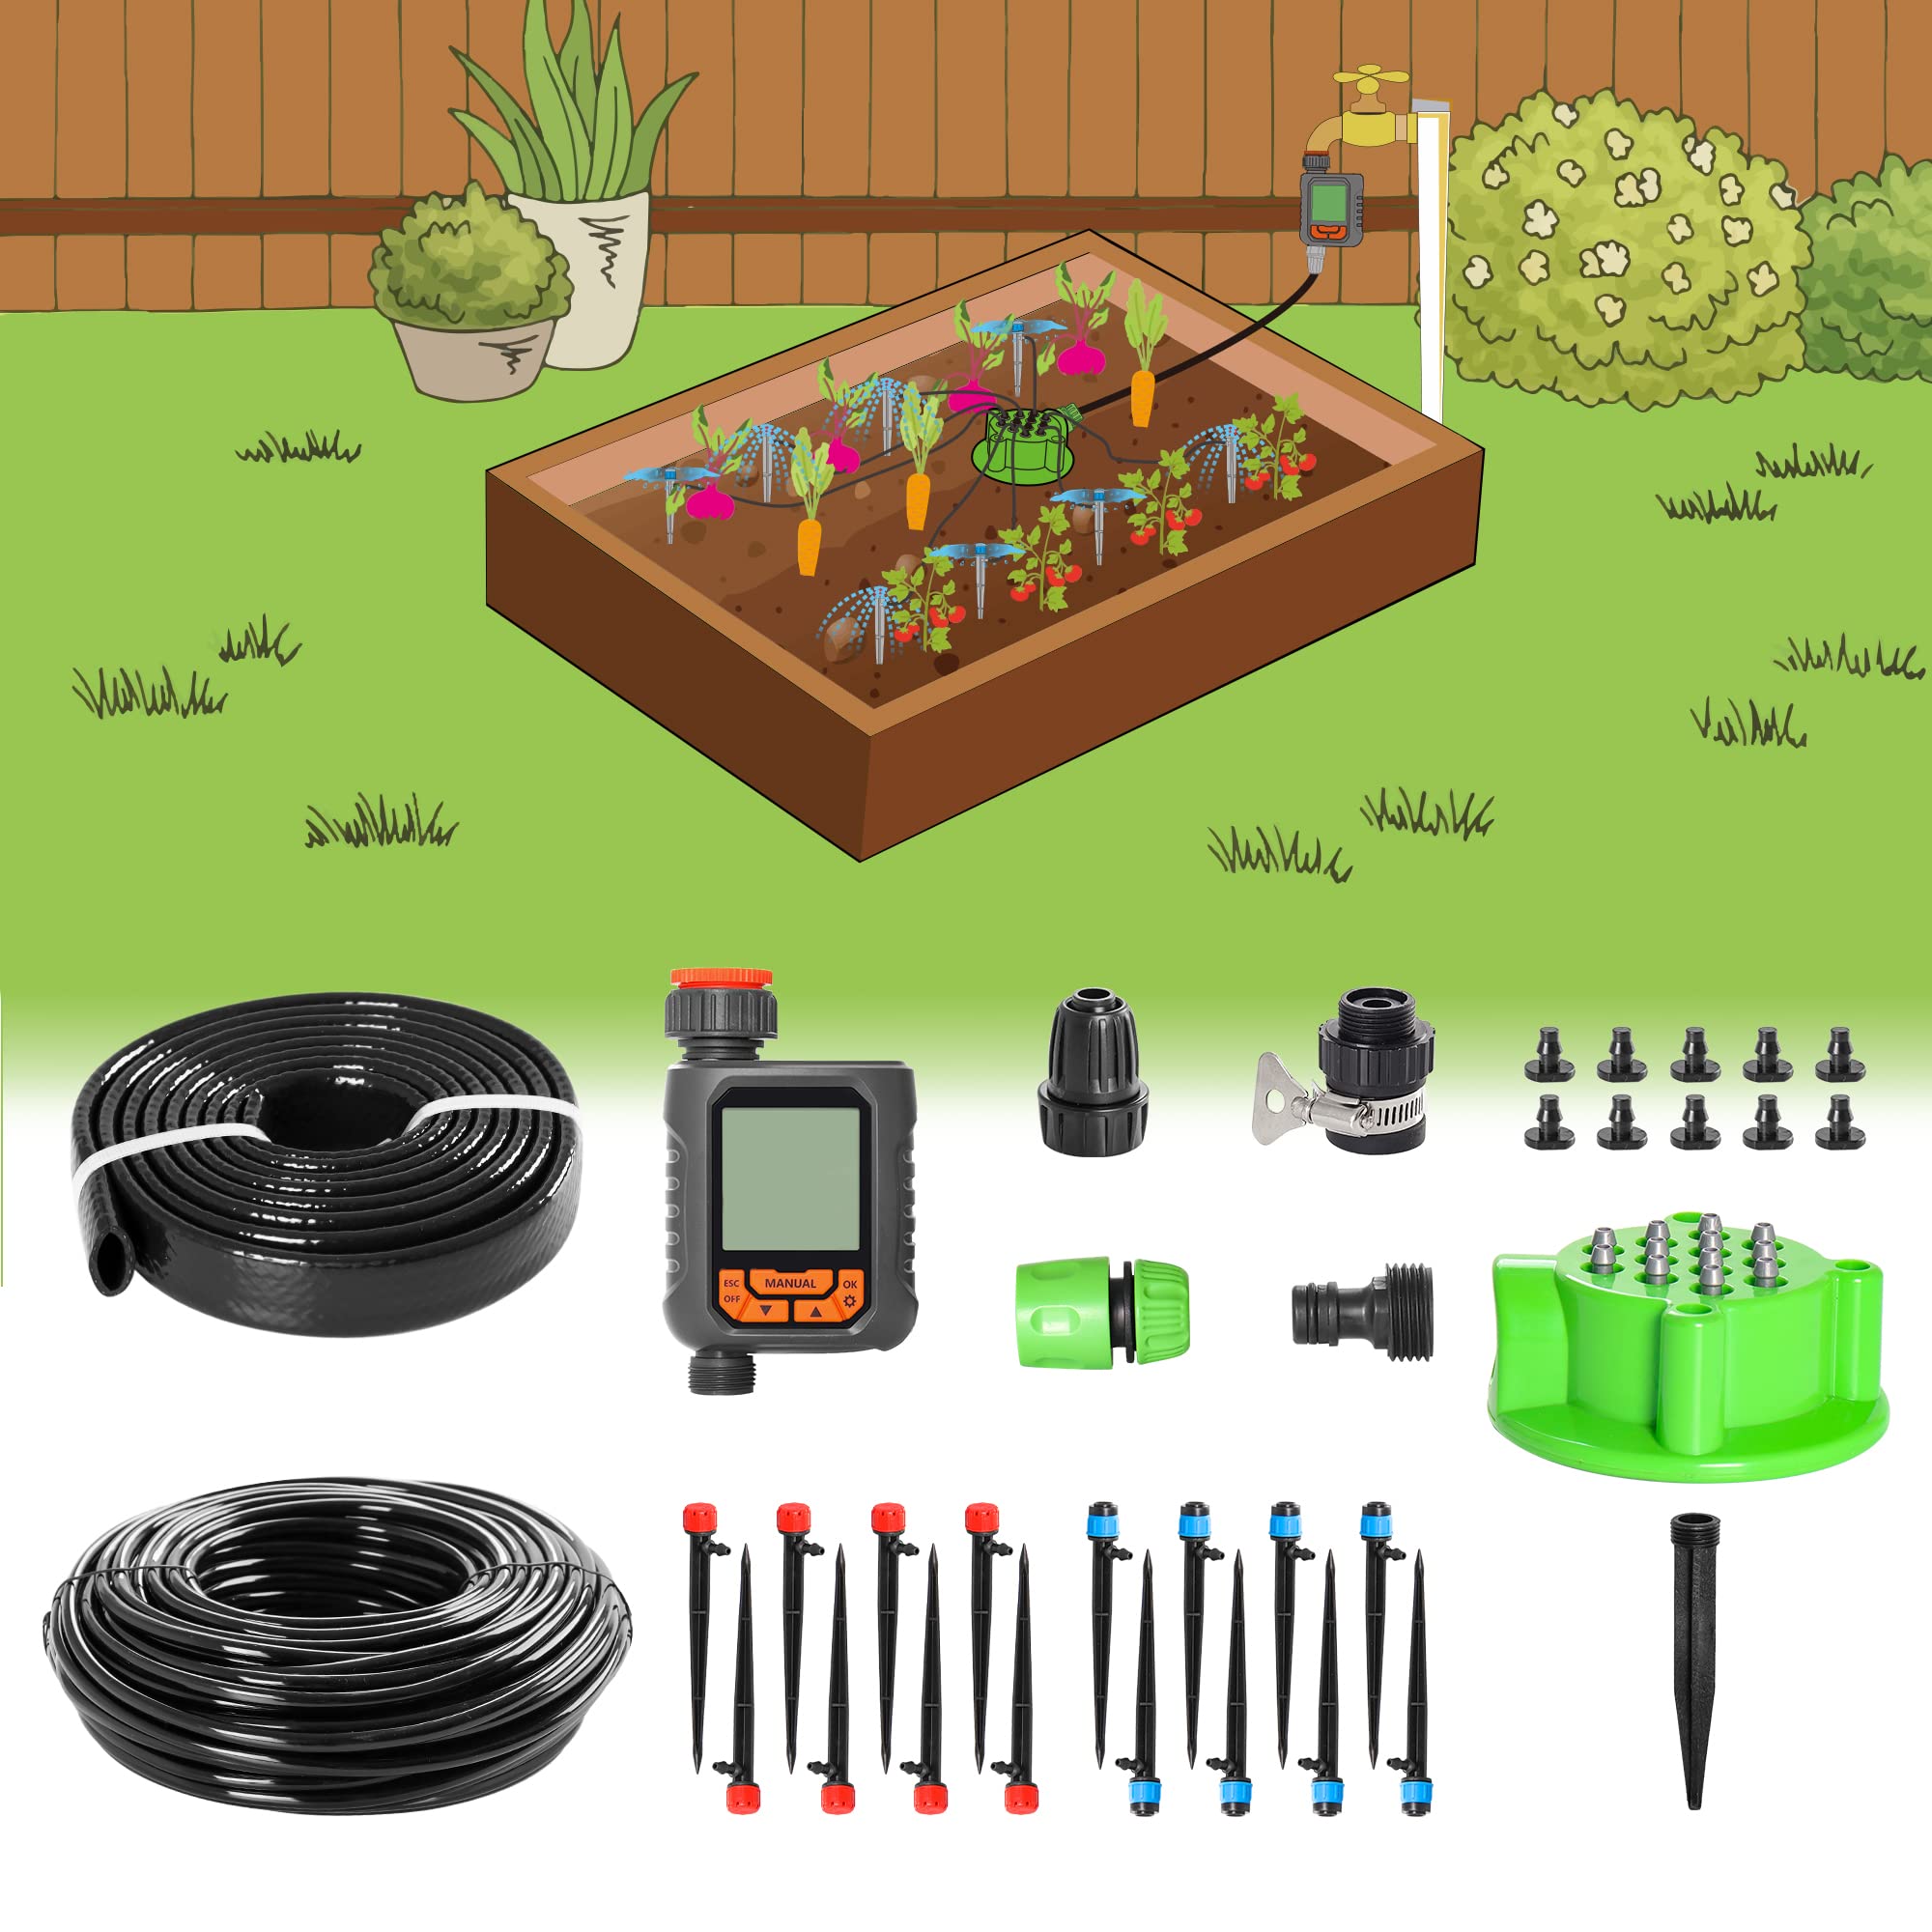 DIY Drip Irrigation System Automatic Watering Kit插图3